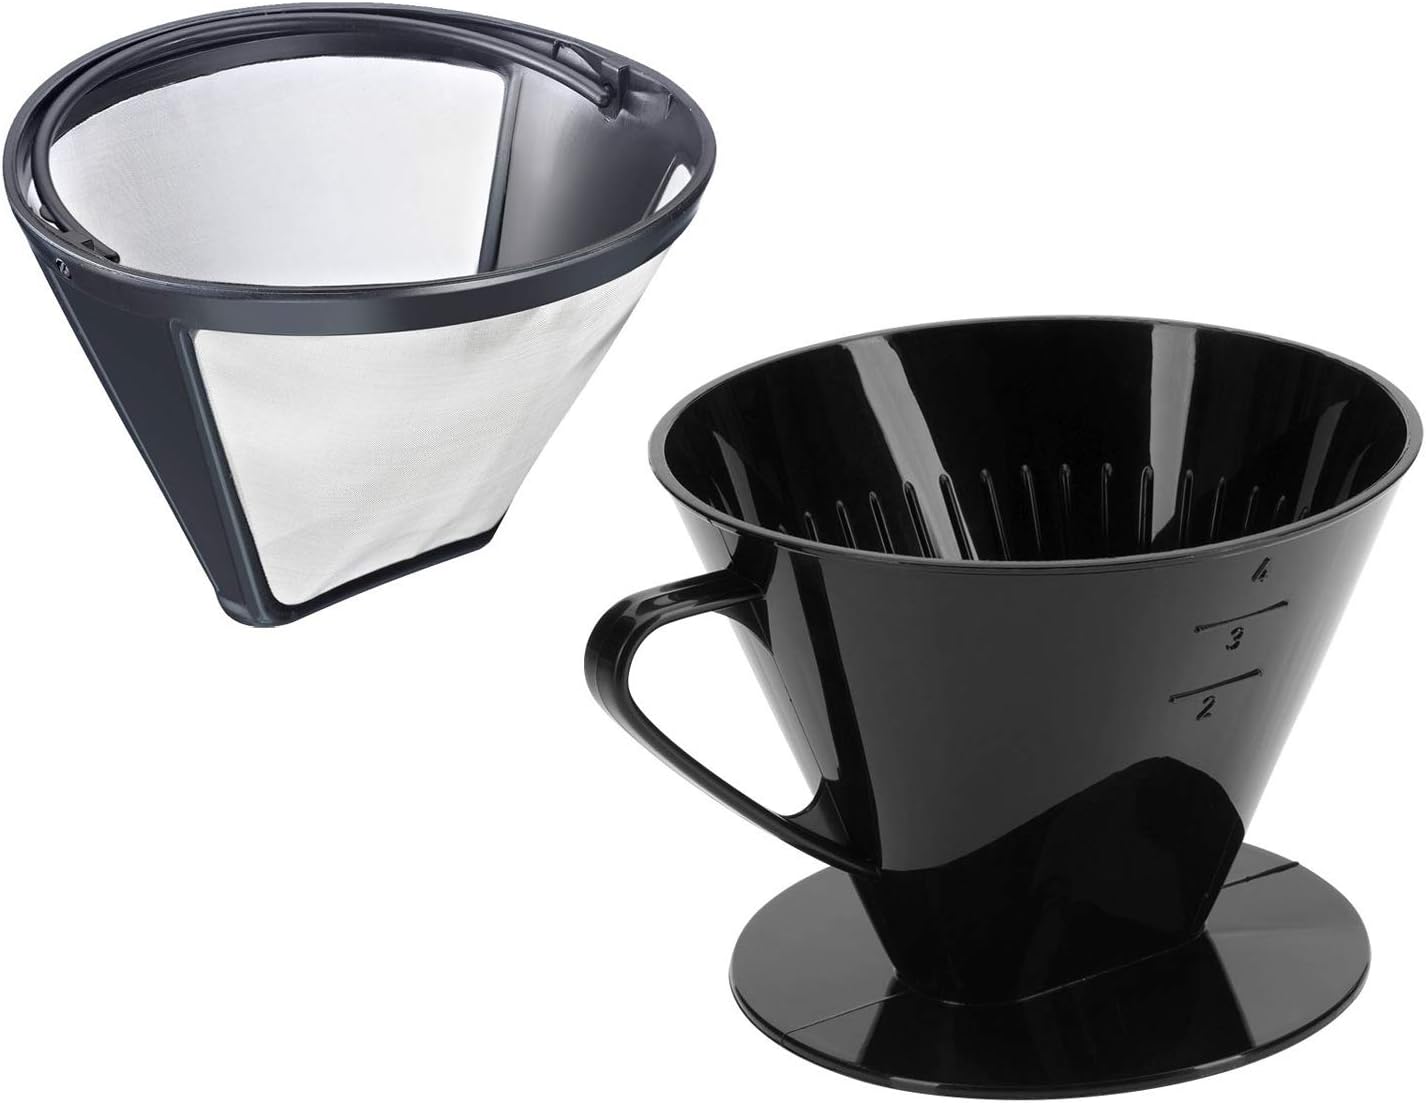 Westmark 244322e7 Coffee Set, Permanent Filter + Coffee Filter Size 4, Stainless Steel / Plastic, Coffee, Four, Silver / Black